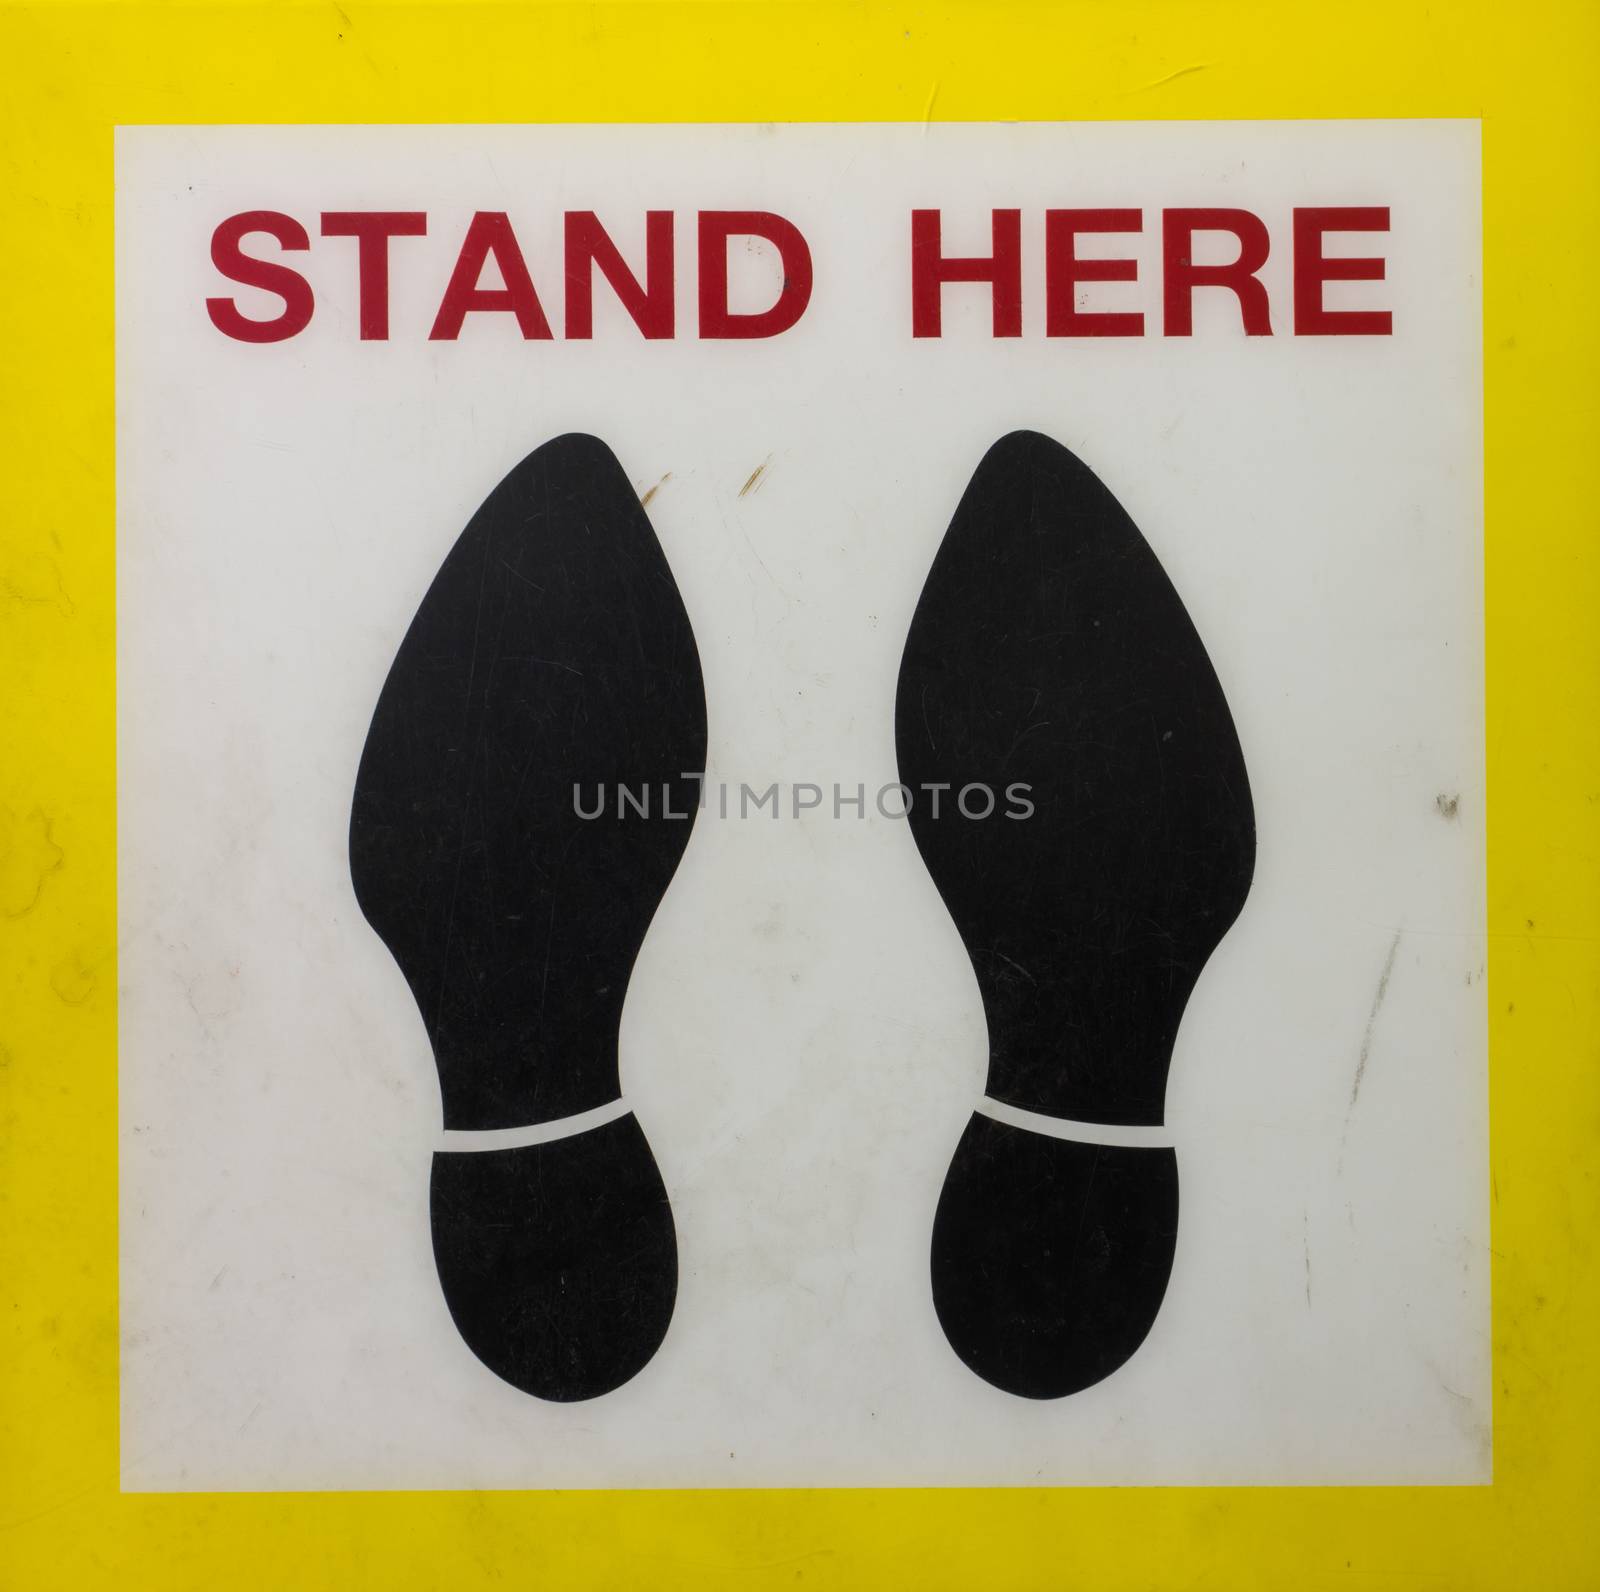 Stand here foot label by shutterbird